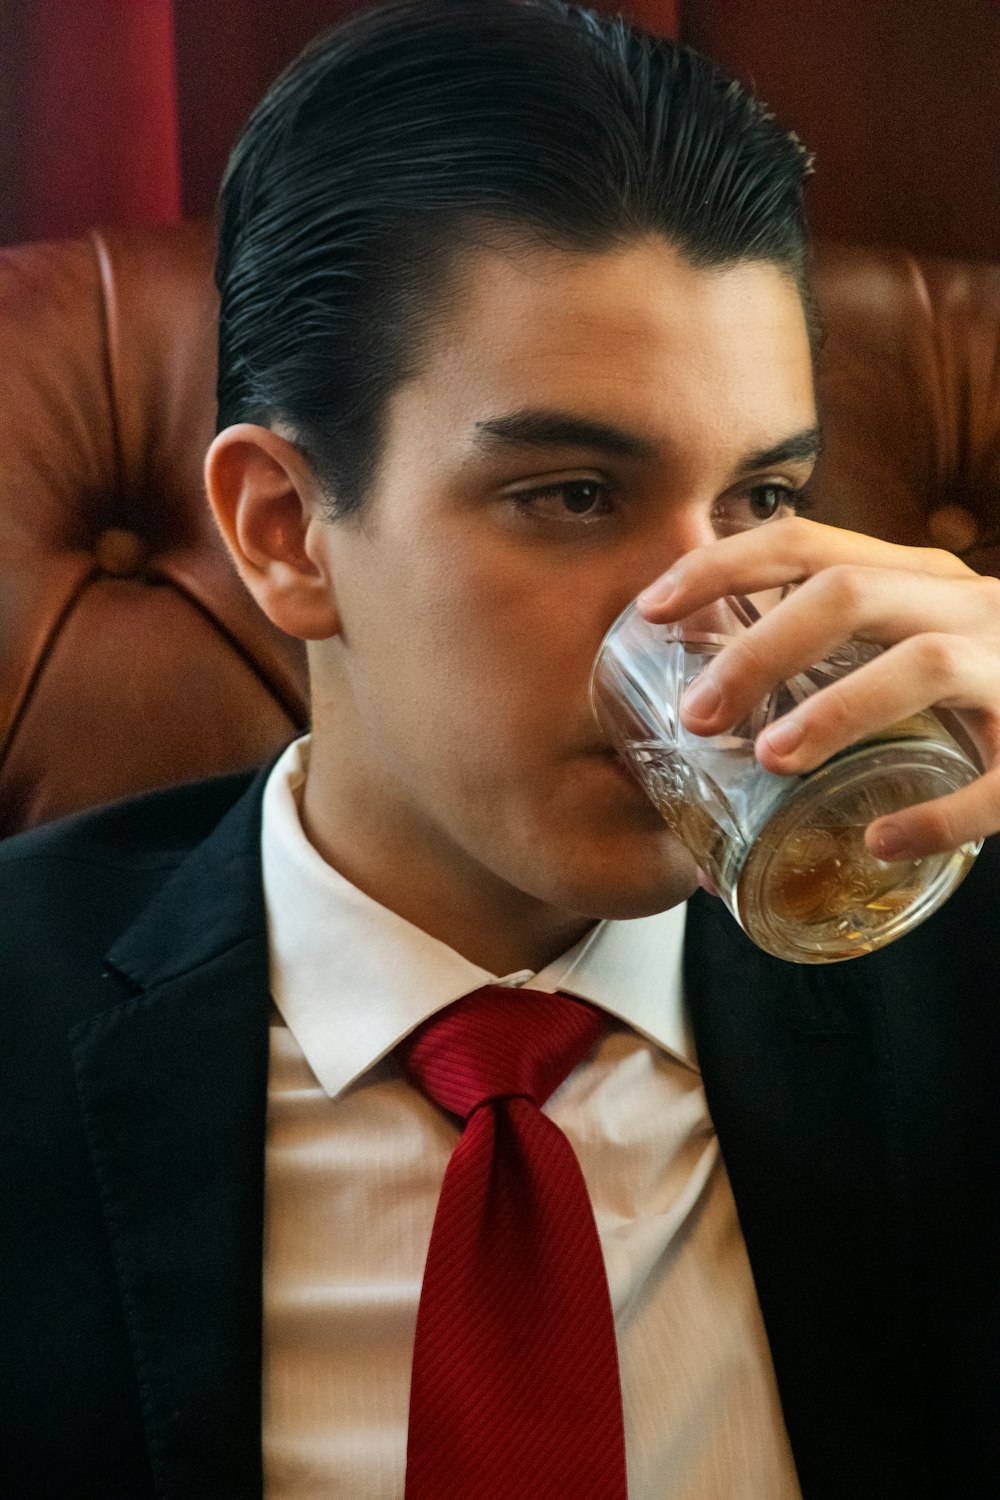 a man in a suit drinking from a glass